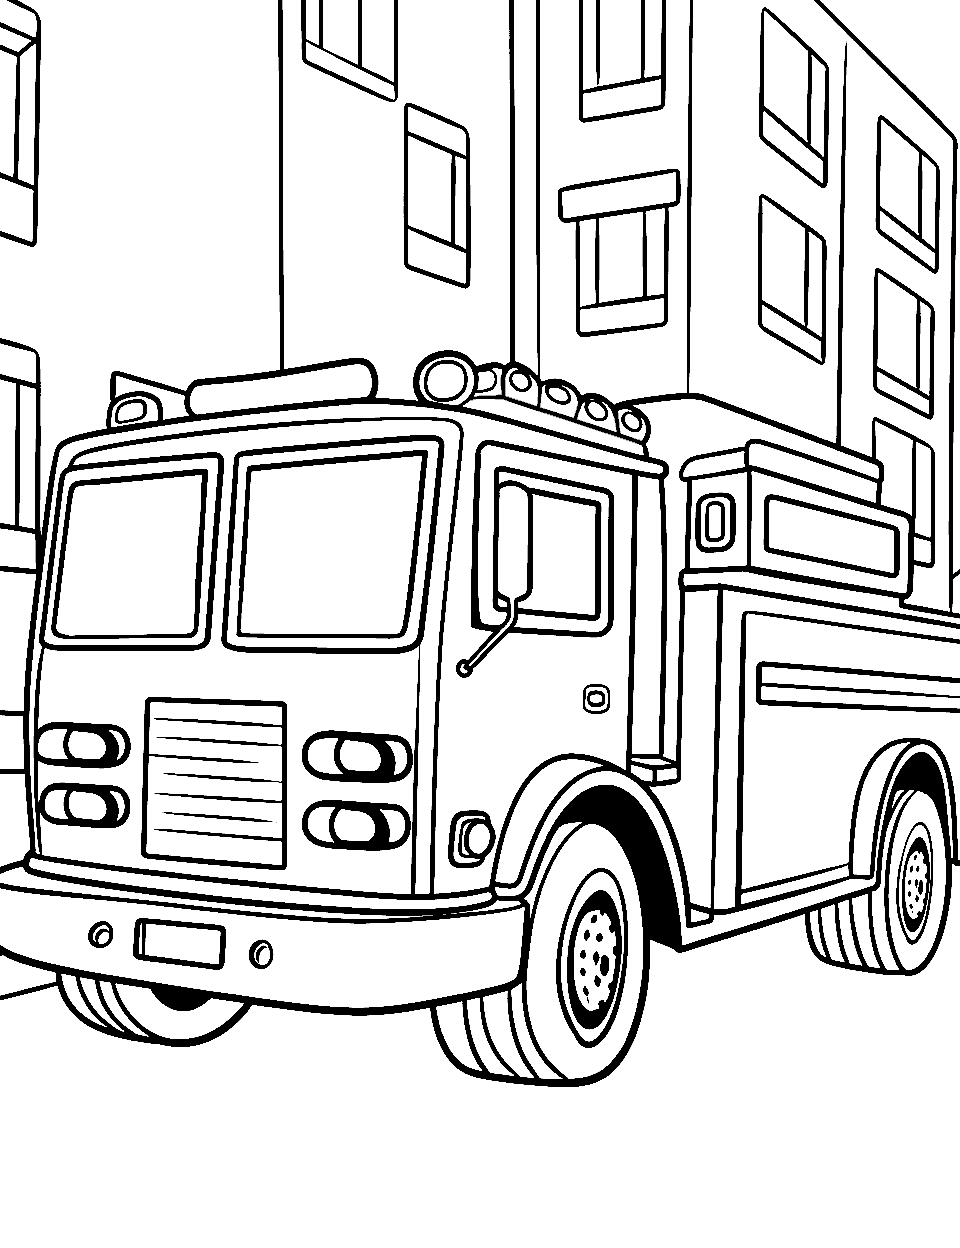 Fire Engine on Duty Truck Coloring Page - A fire engine racing down the city streets.